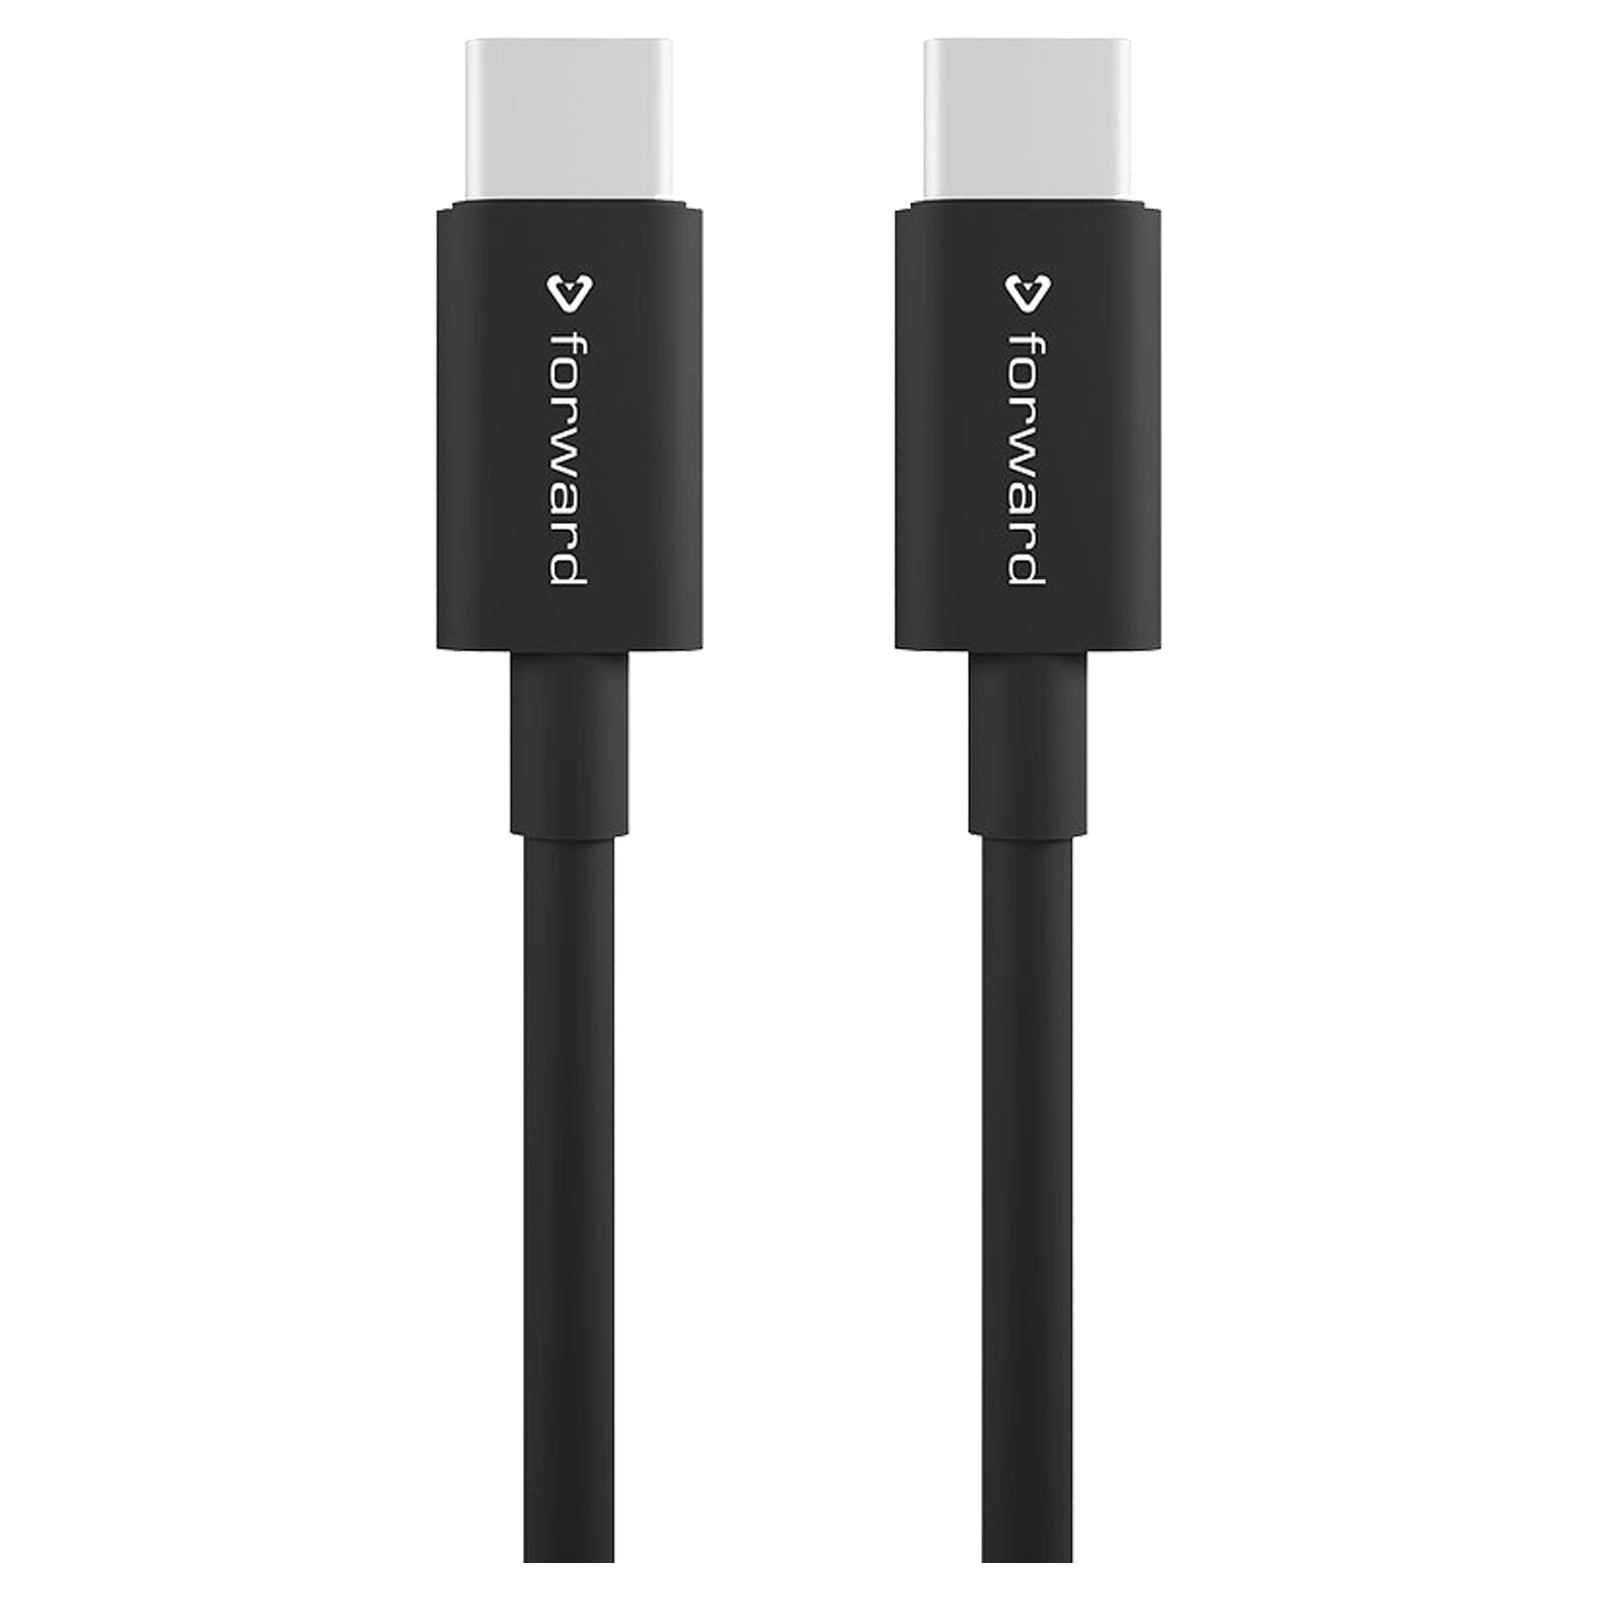 Forward TPE 1 Meter USB 2.0 (Type-C) to USB 2.0 (Type-C) Power/Charging, Data Transfer USB Cable (480 Mbps Data Transfer Rate, FCTT-09, Black)